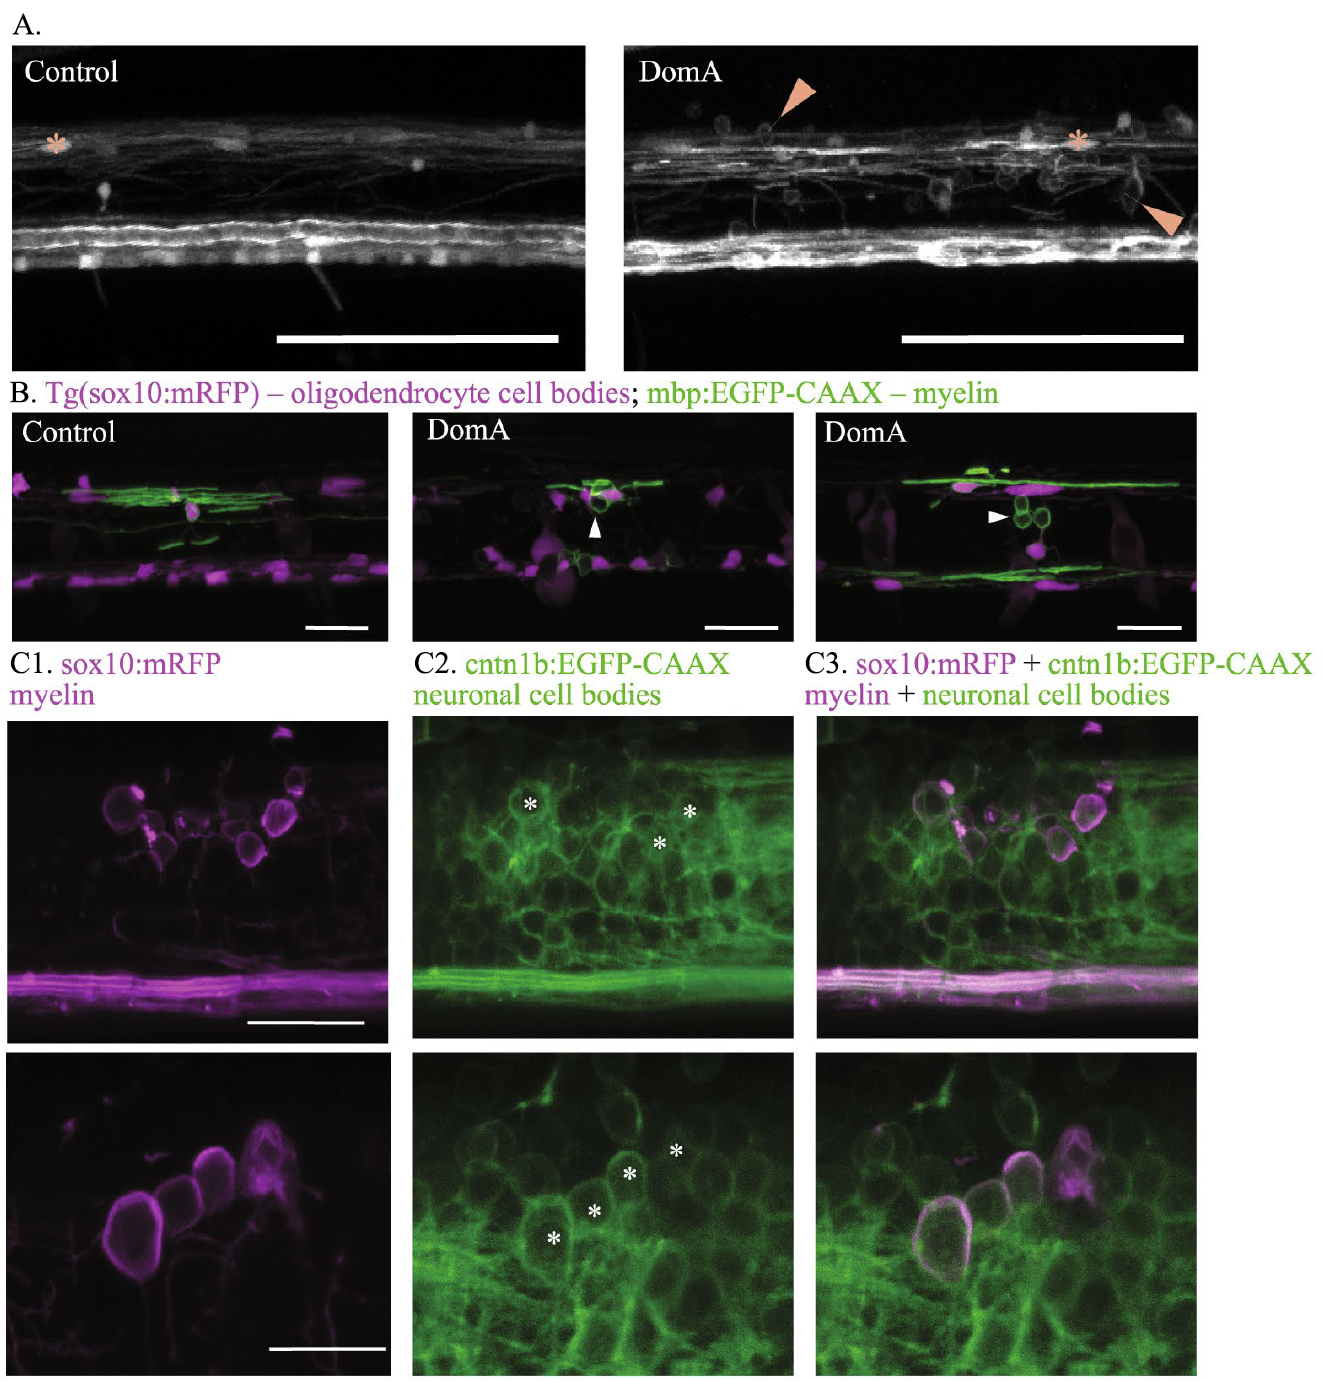 Panlilio JM, Hammar KM, Aluru N, Hahn ME (2023) Developmental exposure to domoic acid targets reticulospinal neurons and leads to aberrant myelination in the spinal cord. Scientific reports. 13(1):2587. https://doi.org/10.1038/s41598-023-28166-2